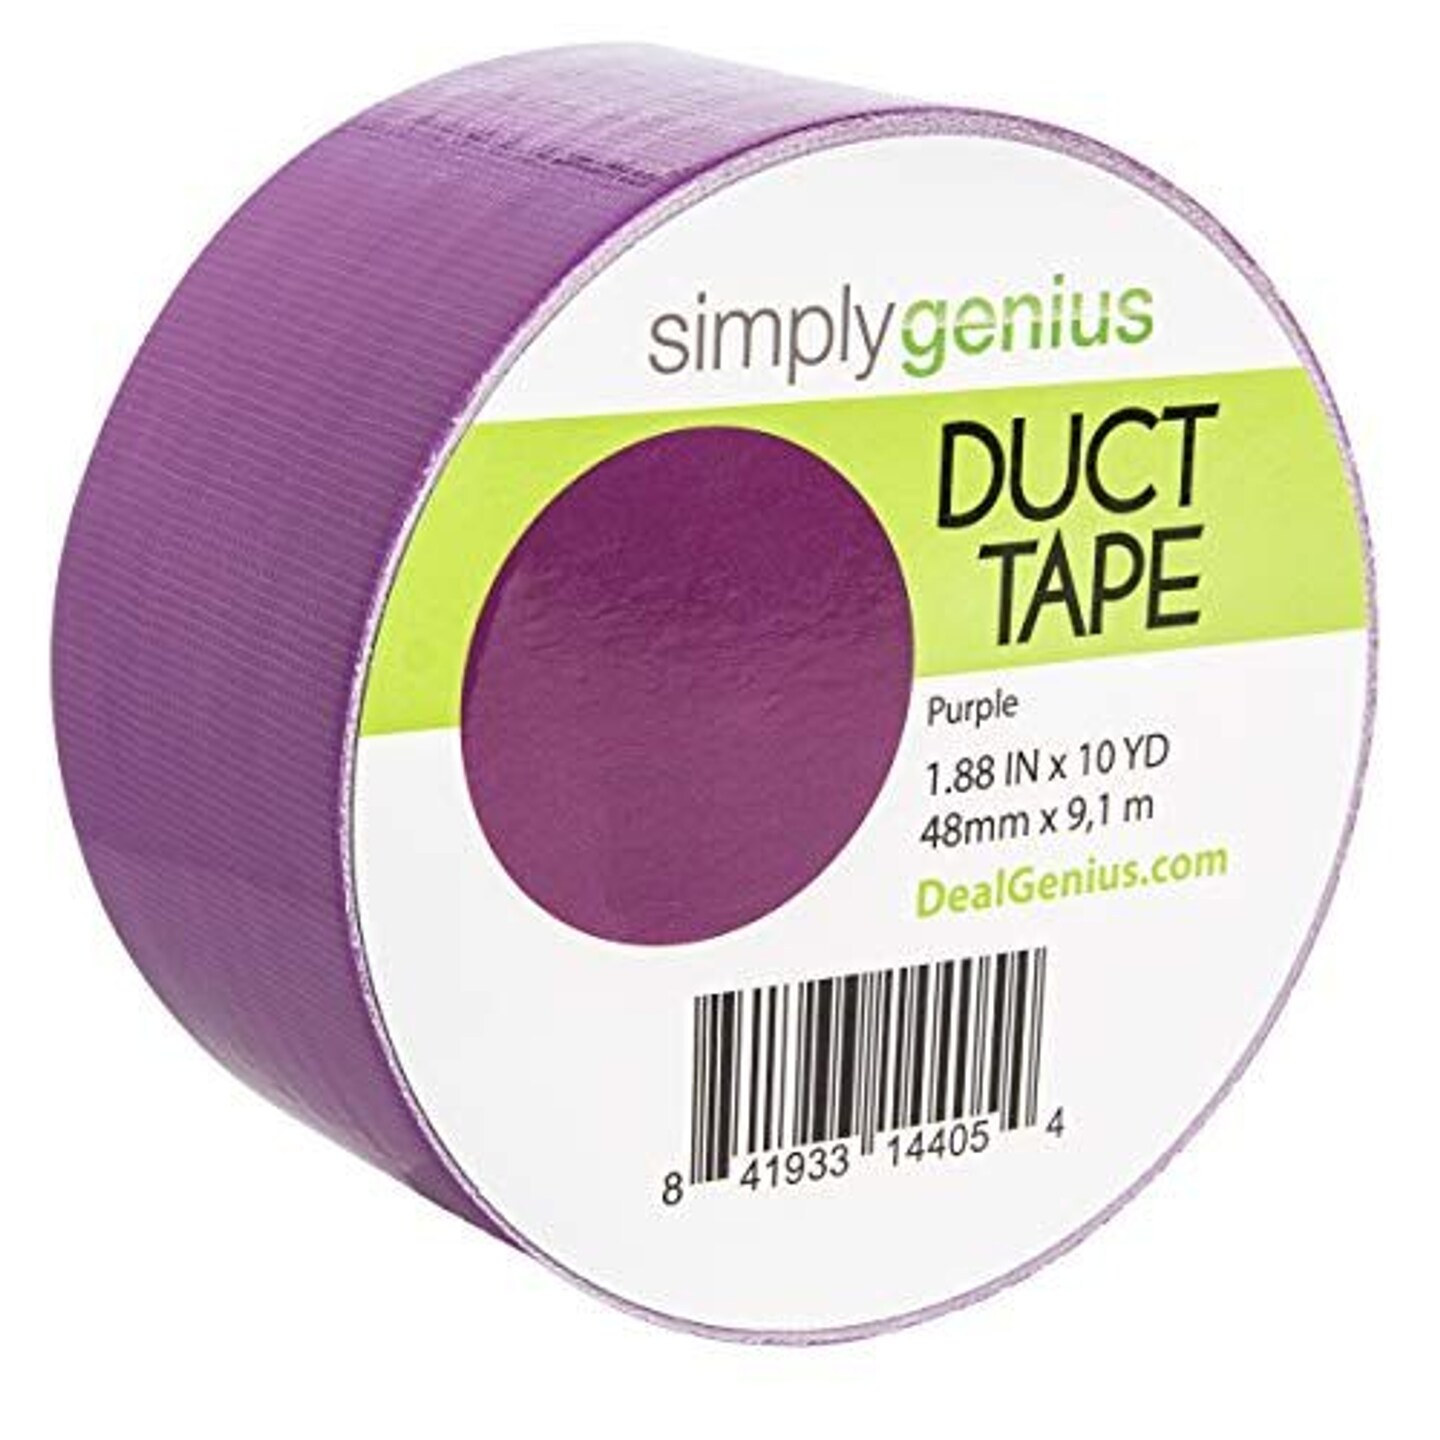 Simply Genius Art &#x26; Craft Duct Tape Heavy Duty - Craft Supplies for Adults - Colored Duct Tape - 1.8 in x 10 yards - Colorful Tape for DIY, Craft &#x26; Home Improvement (Purple, Single roll)